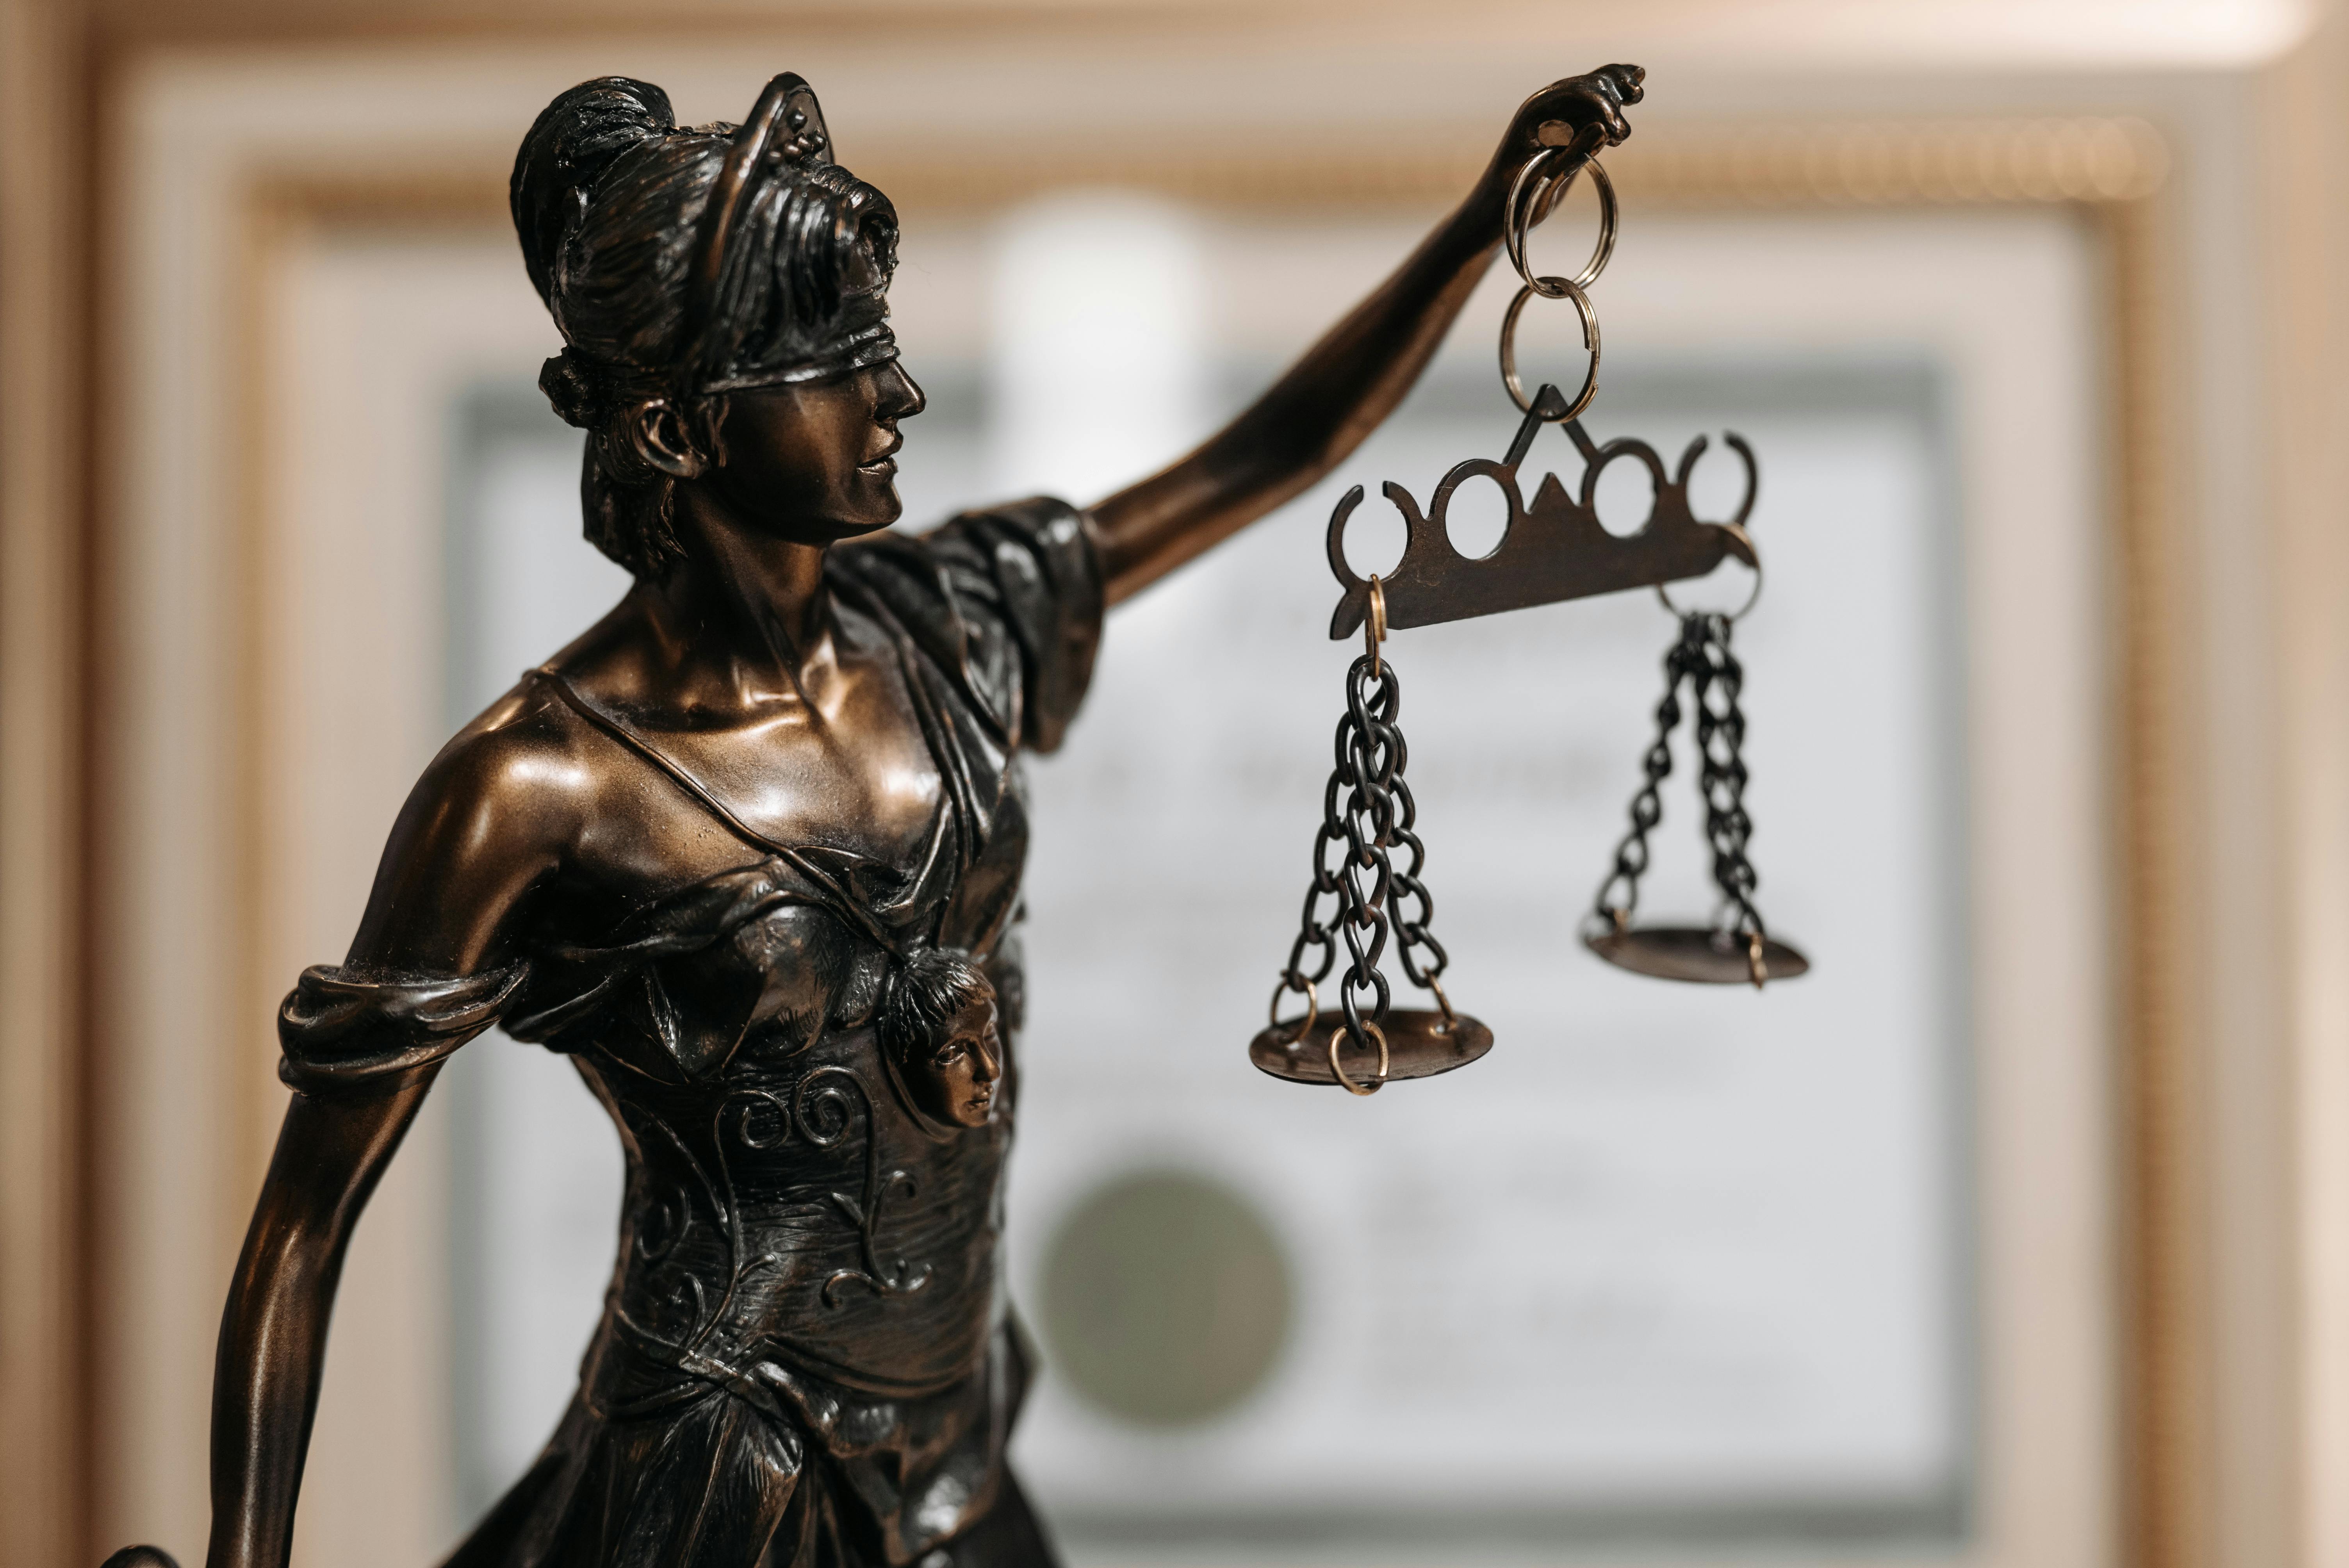 A metal statue of a woman holding up the scales of justice